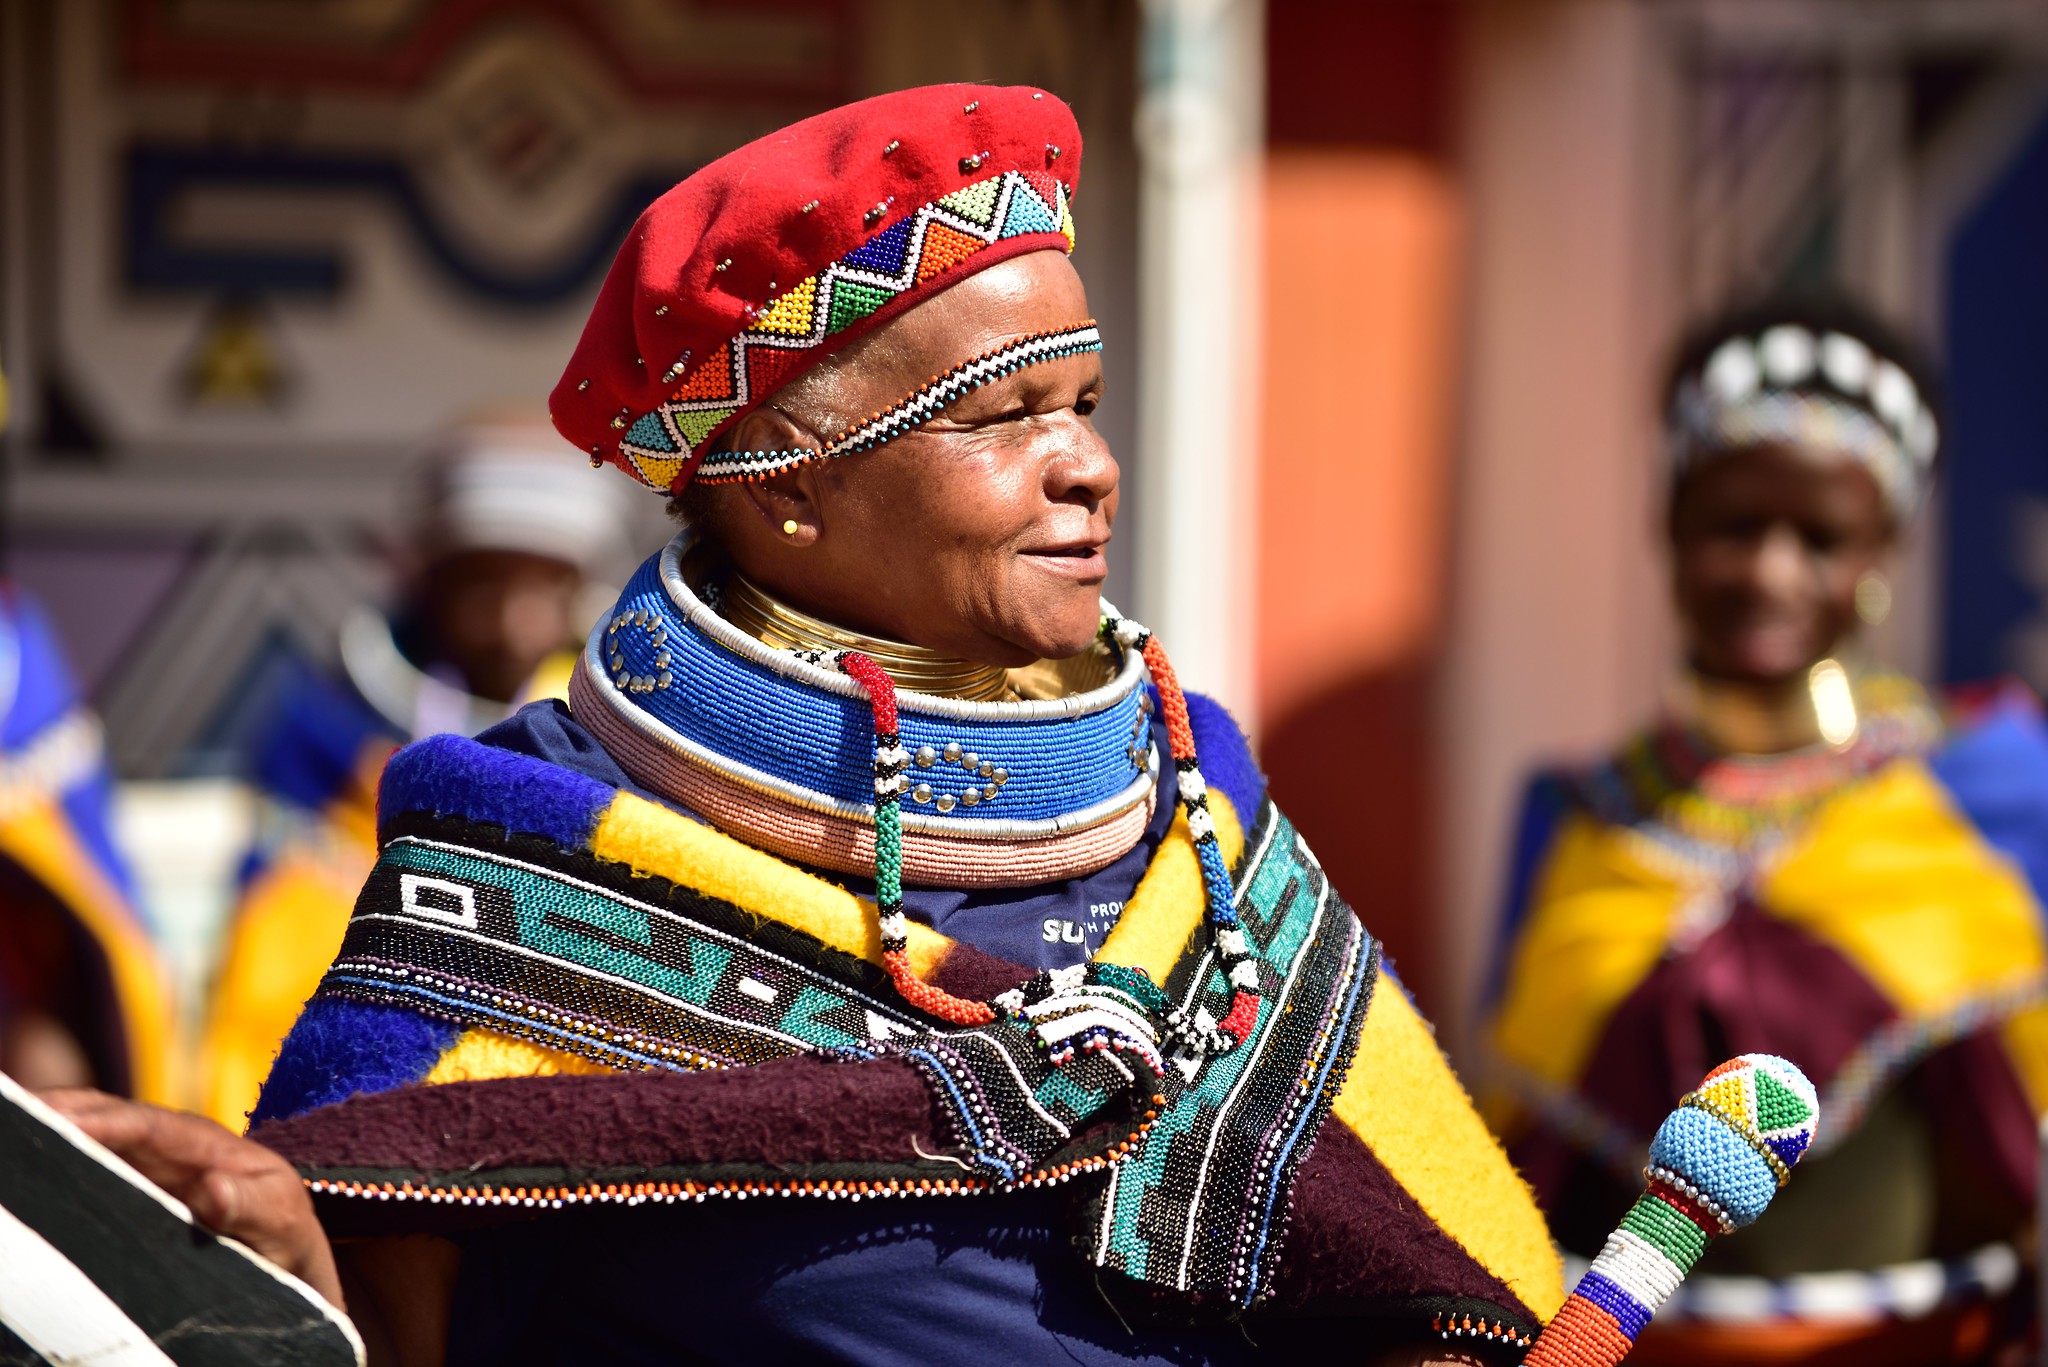 South African Tourism, Ndebele village, Mpumalanga, South Africa, 2015. Image: CC BY 2.0.